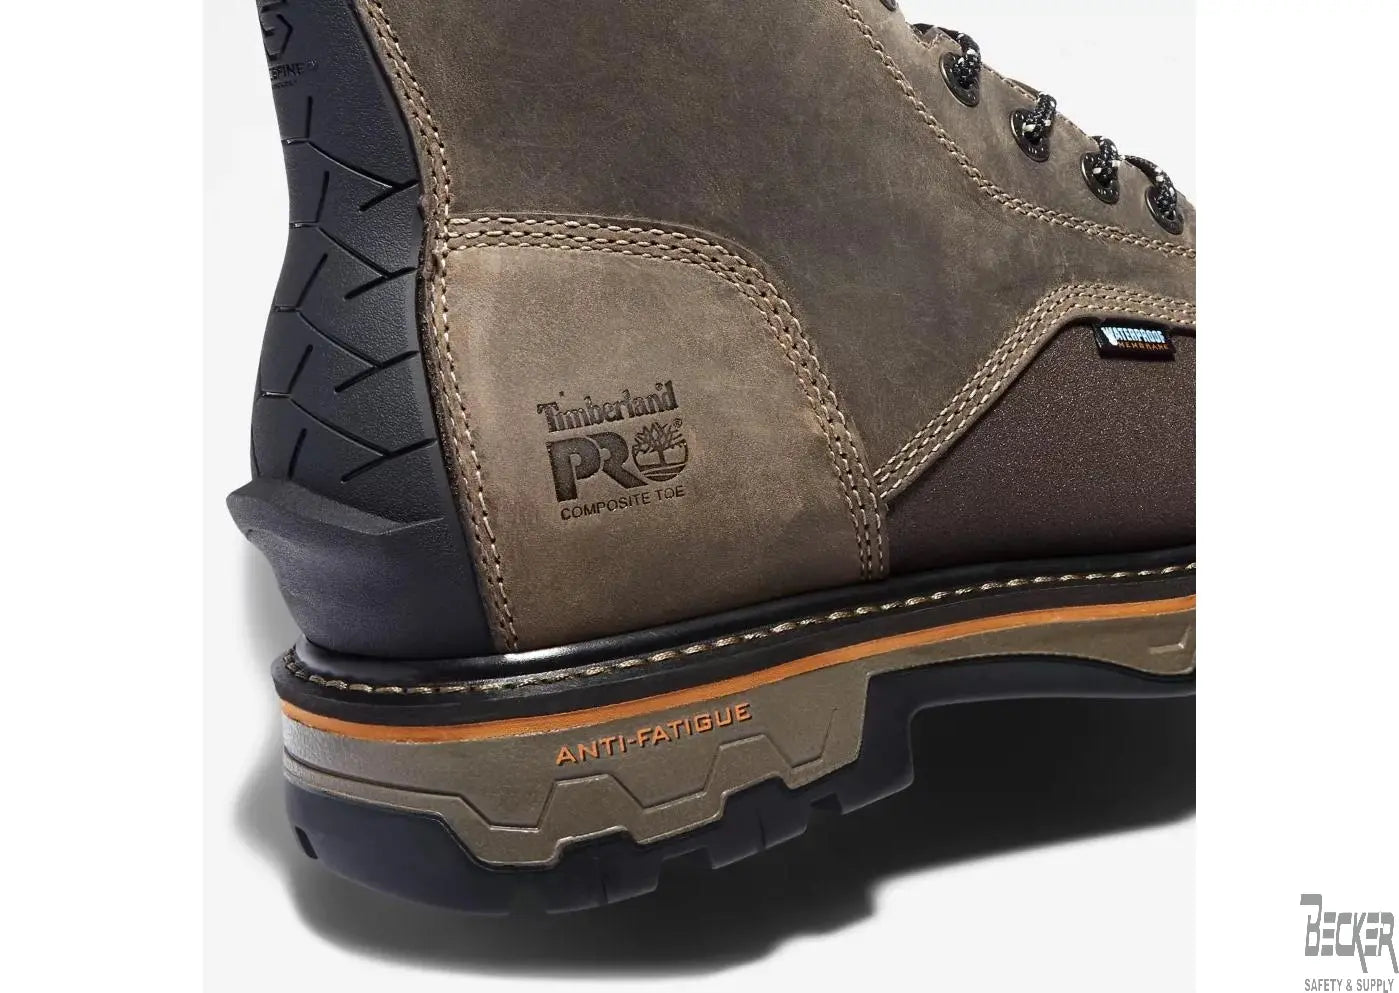 TIMBERLAND PRO - Men's True Grit 8" Composite Toe Work Boot - Becker Safety and Supply